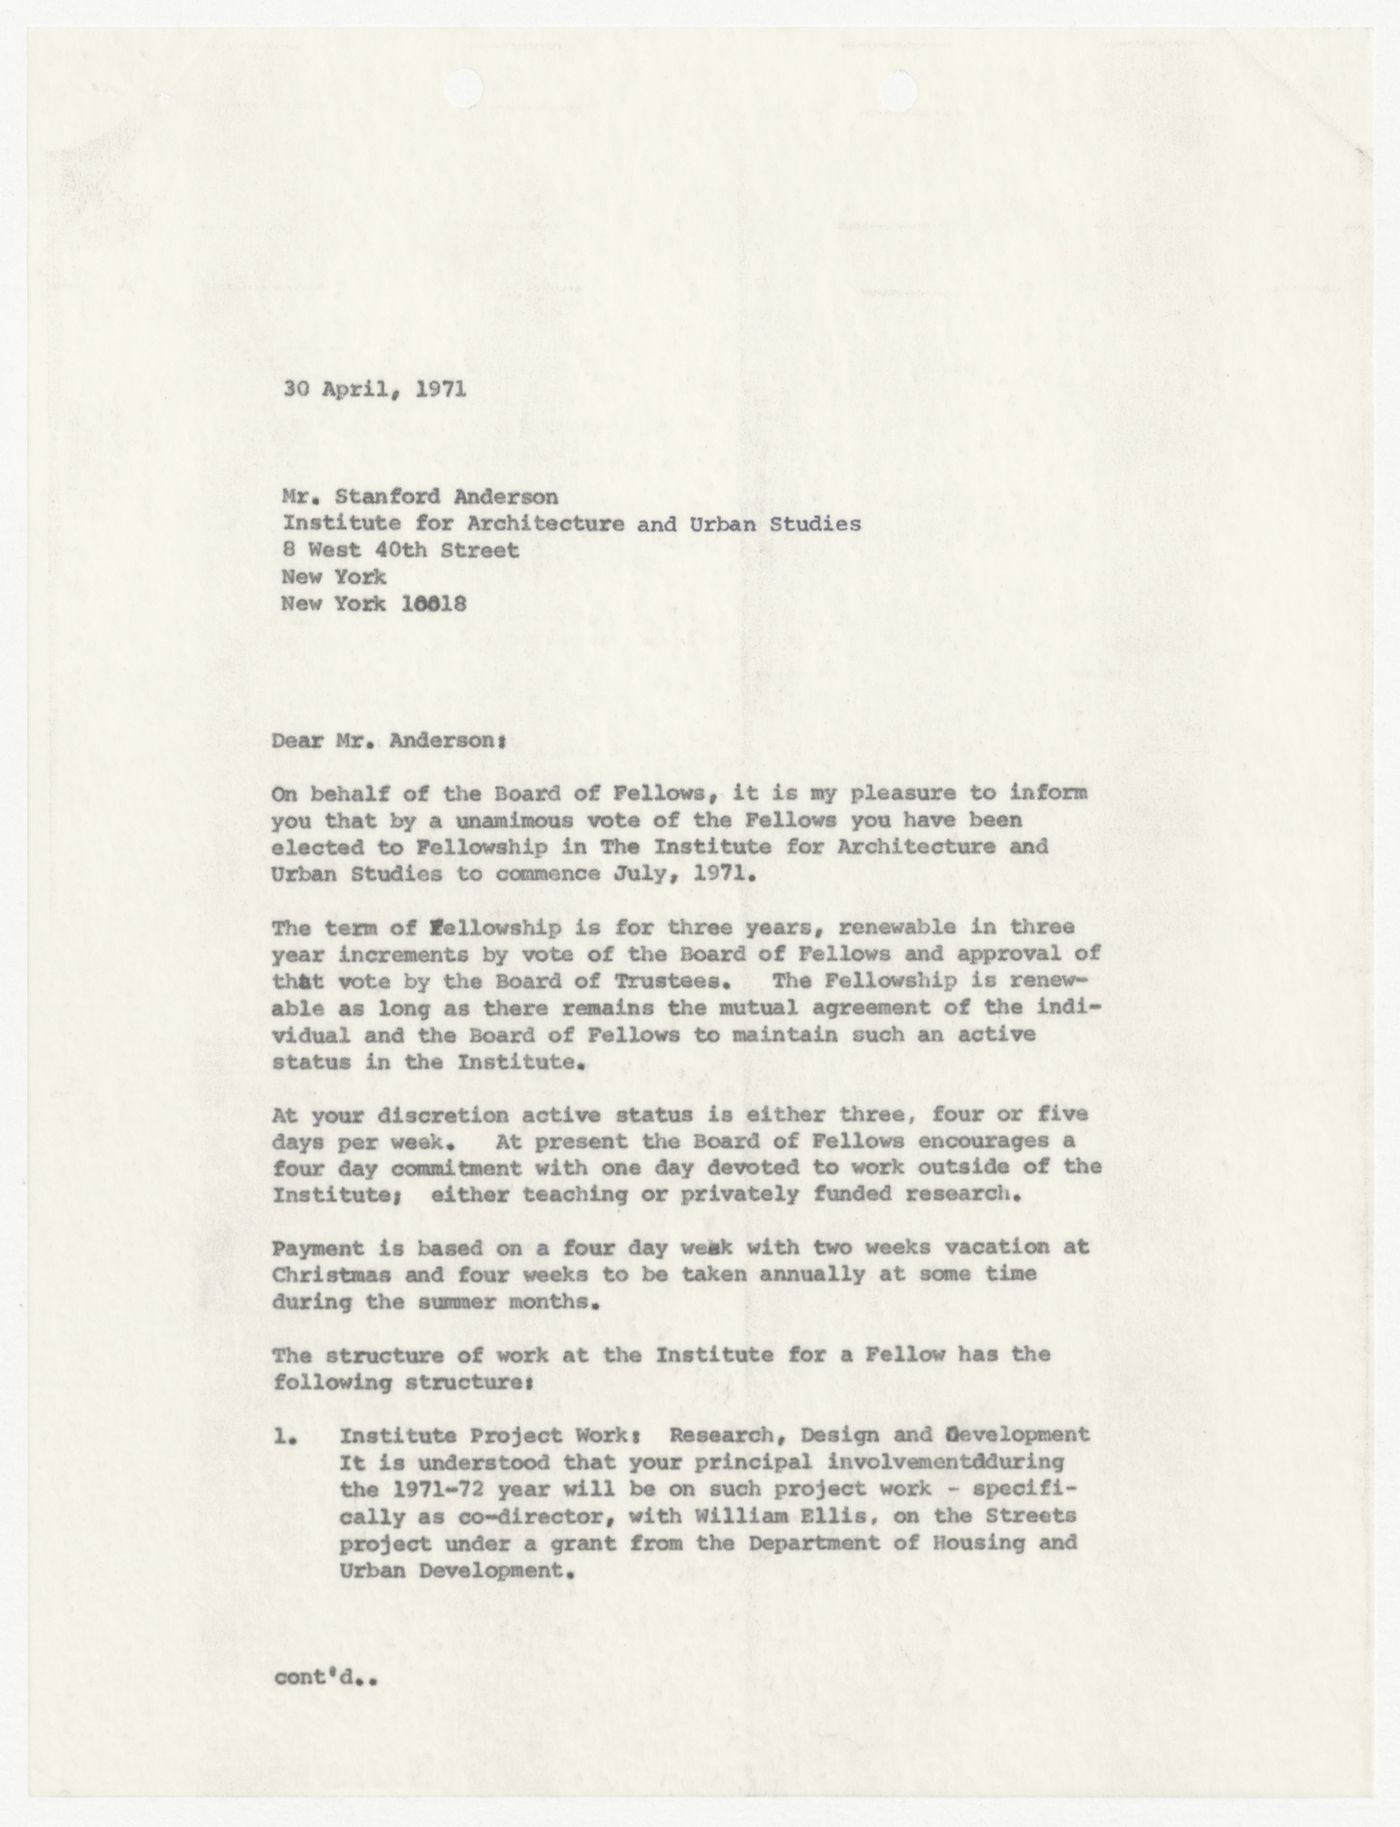 Letter from Peter D. Eisenman to Stanford Anderson confirming Anderson's election as a Fellow